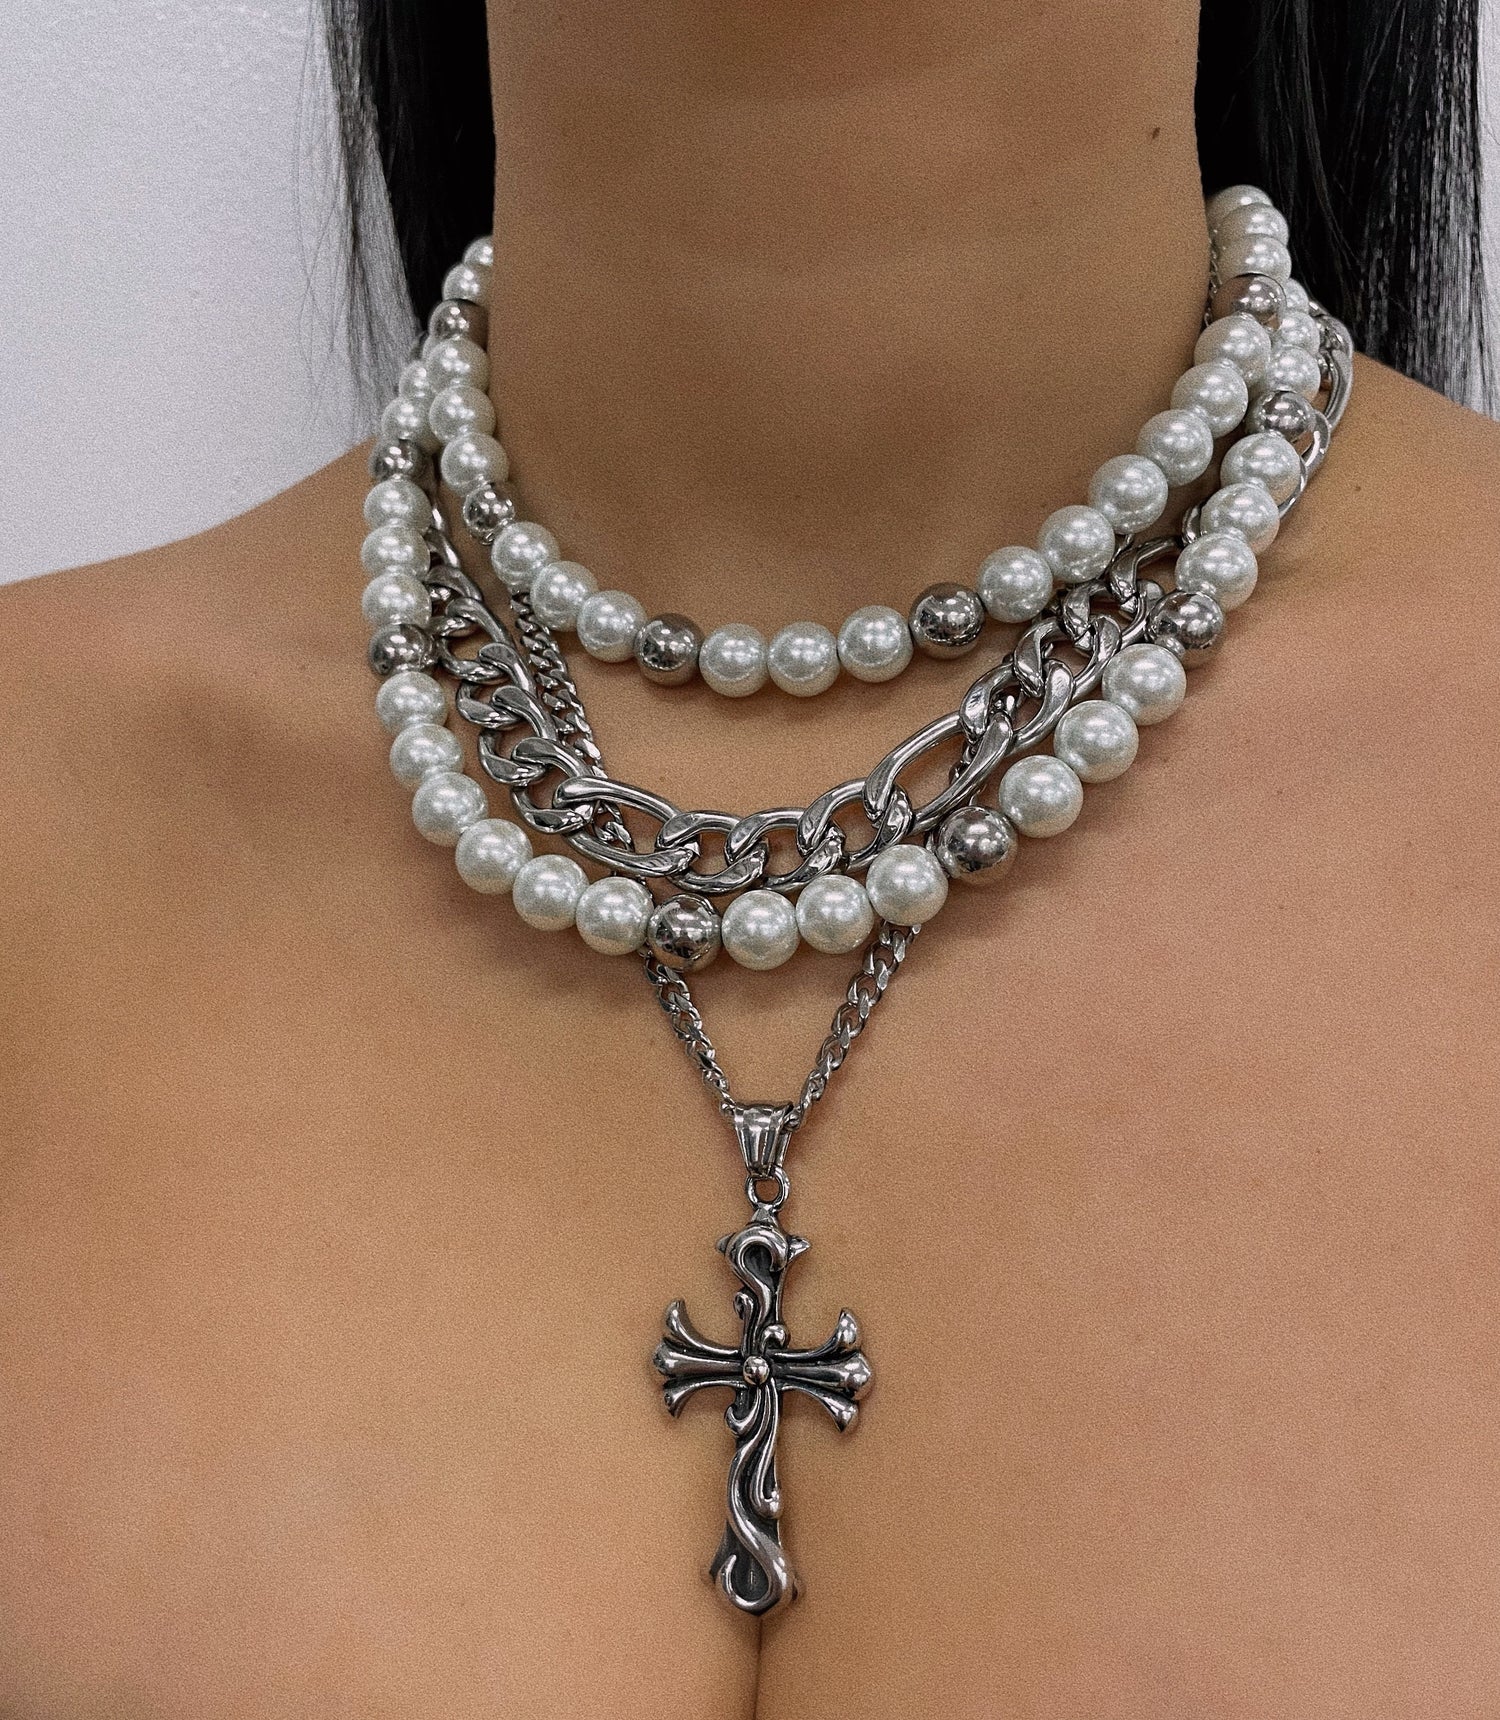 SILVER GOTHIC CROSS NECKLACE – ByLolita